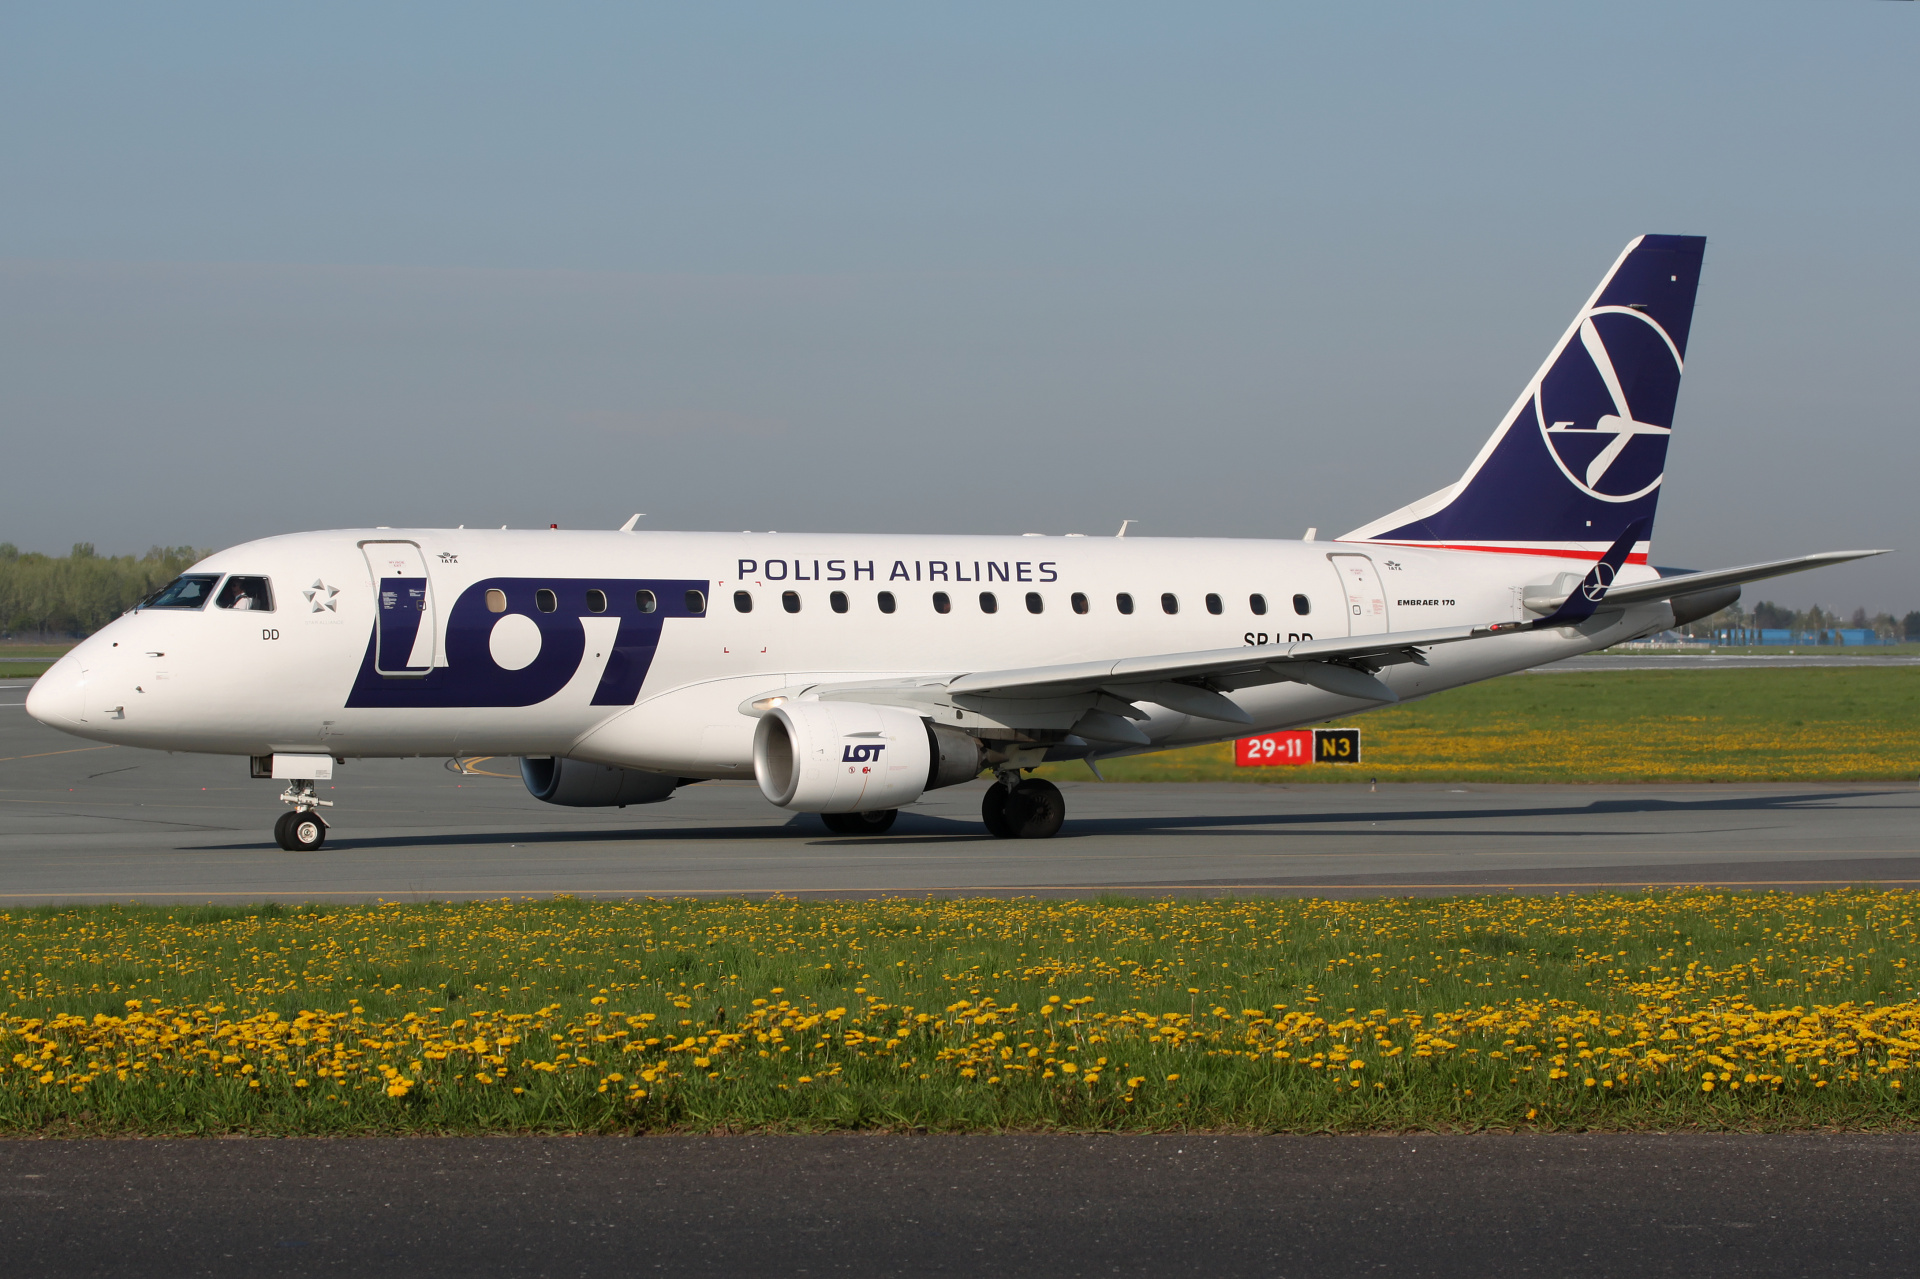 SP-LDD (new livery) (Aircraft » EPWA Spotting » Embraer E170 » LOT Polish Airlines)